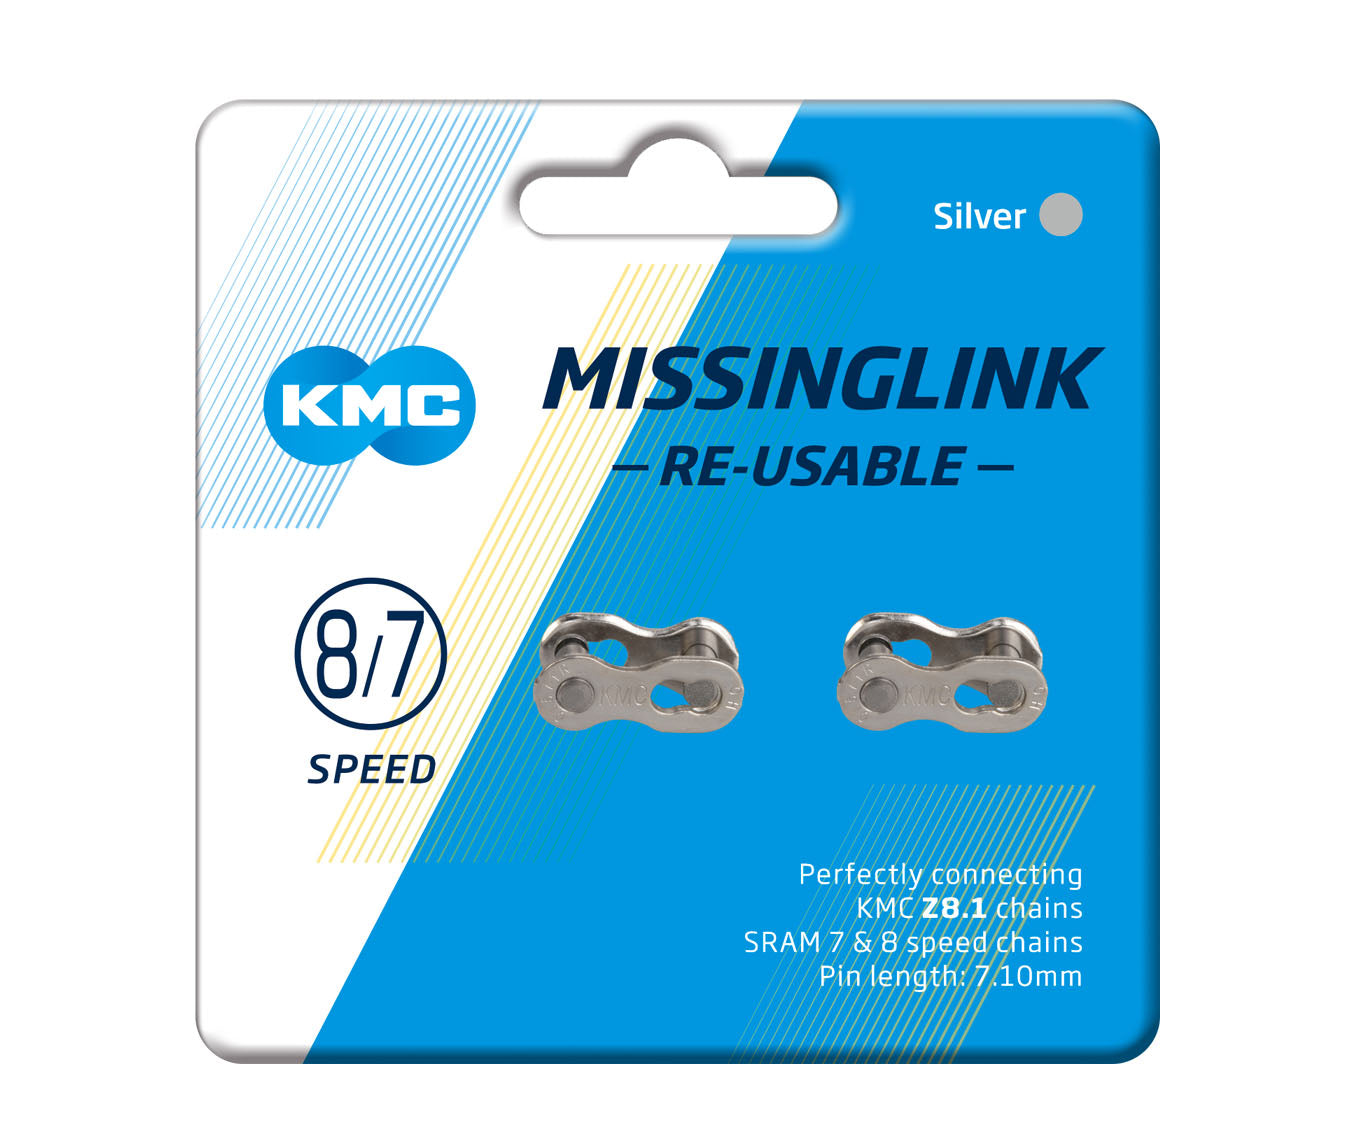 KMC CL571R 8 Speed Chain Connector